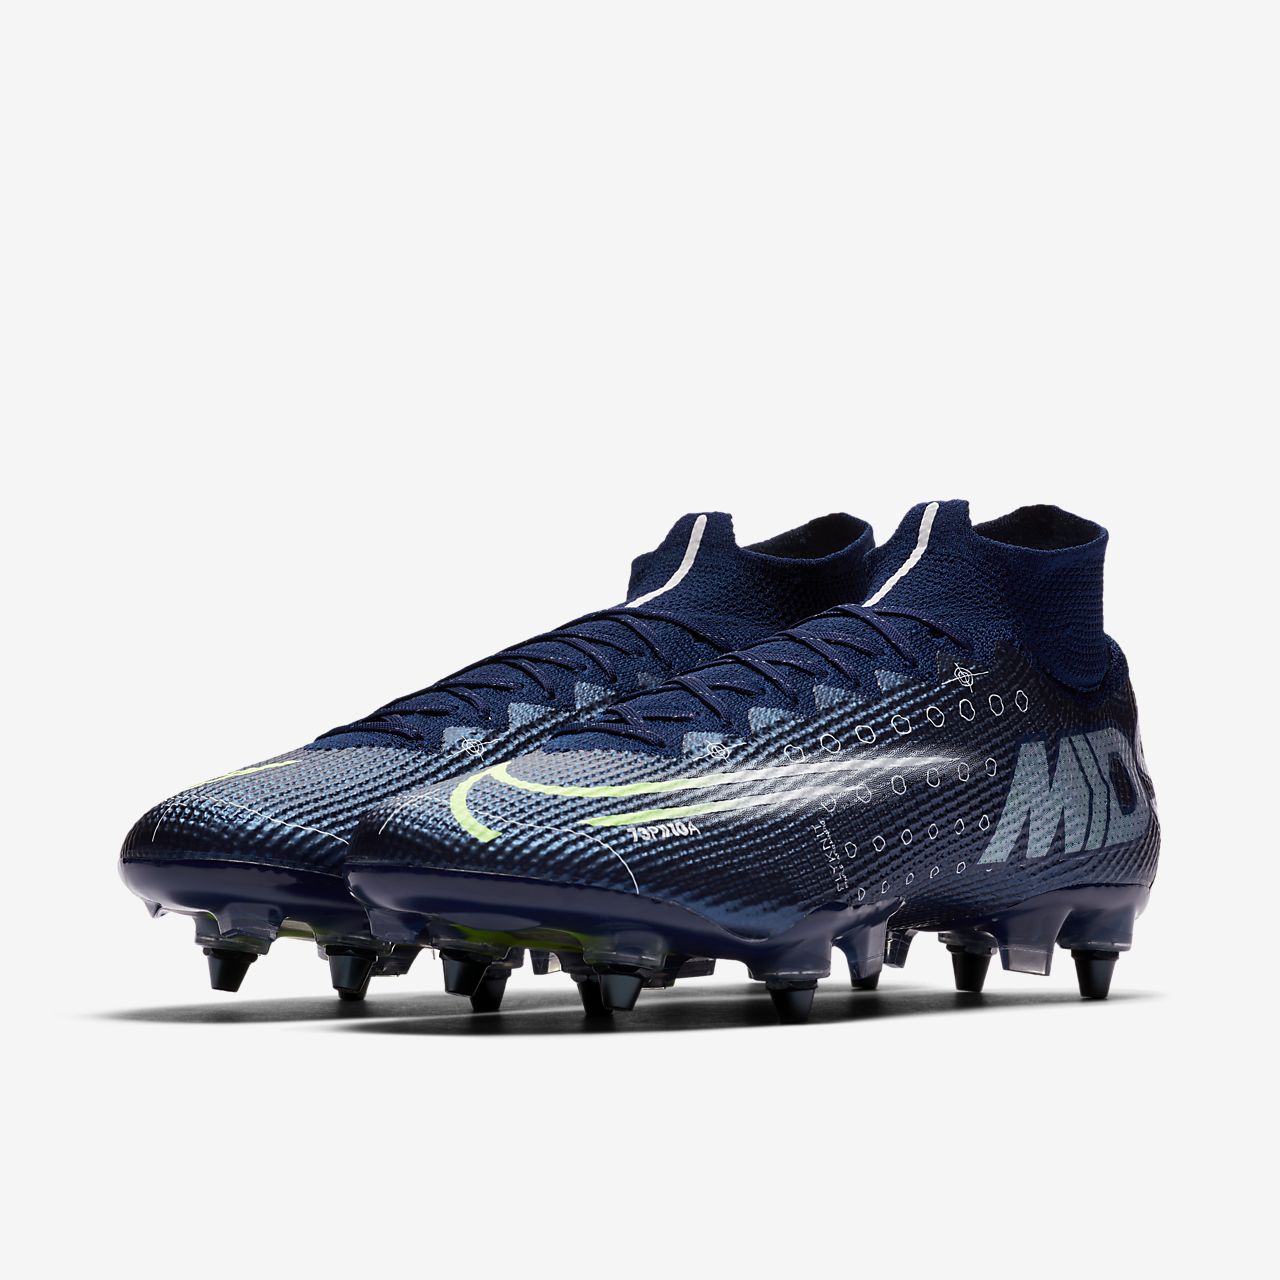 Nike Superfly 6 Elite FG Firm Ground Soccer Cleat.